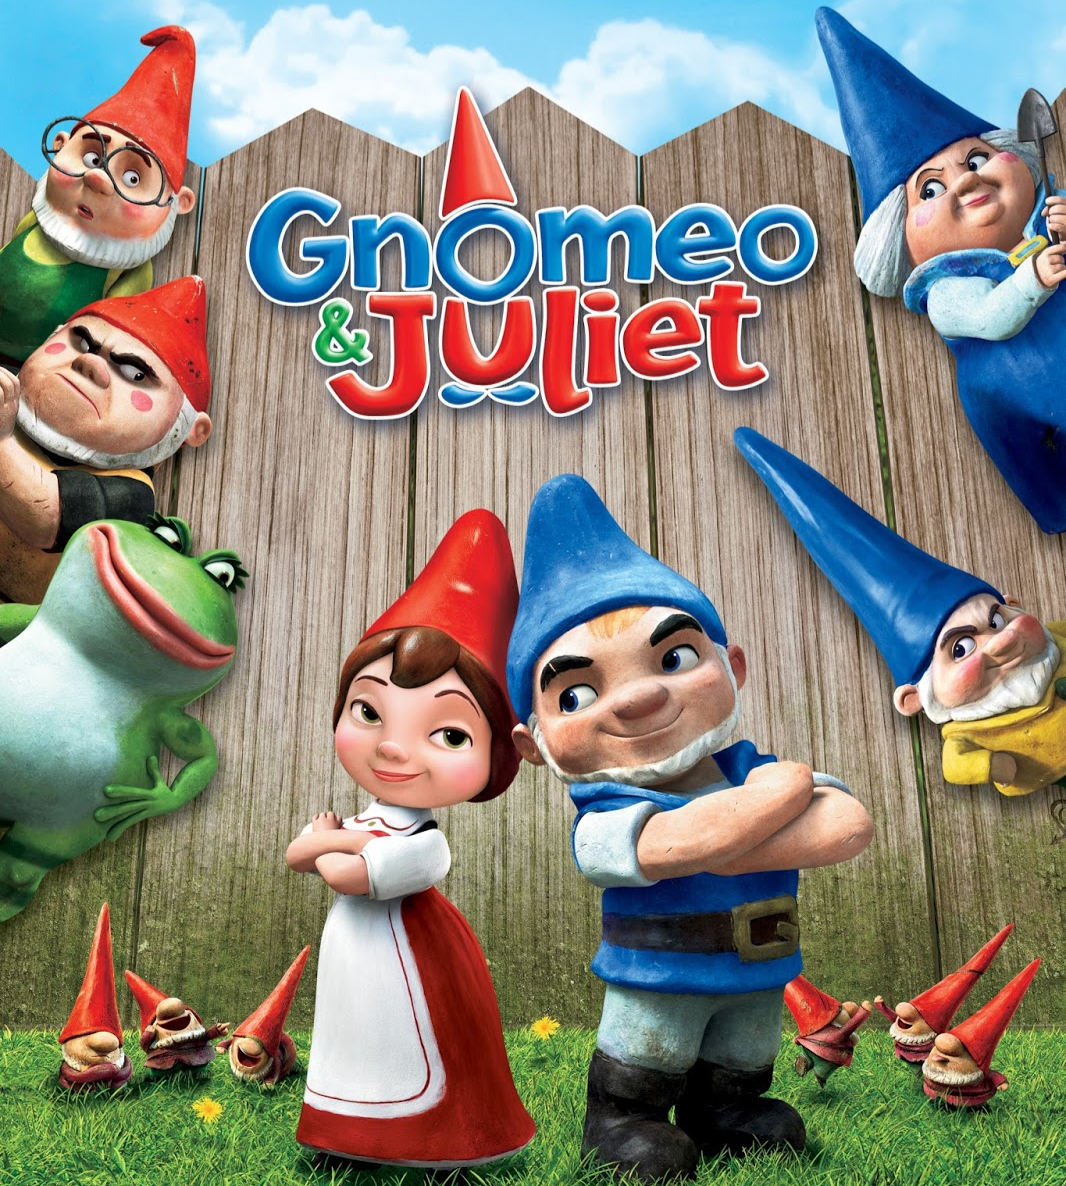 Gnomeo and Juliet party napkin